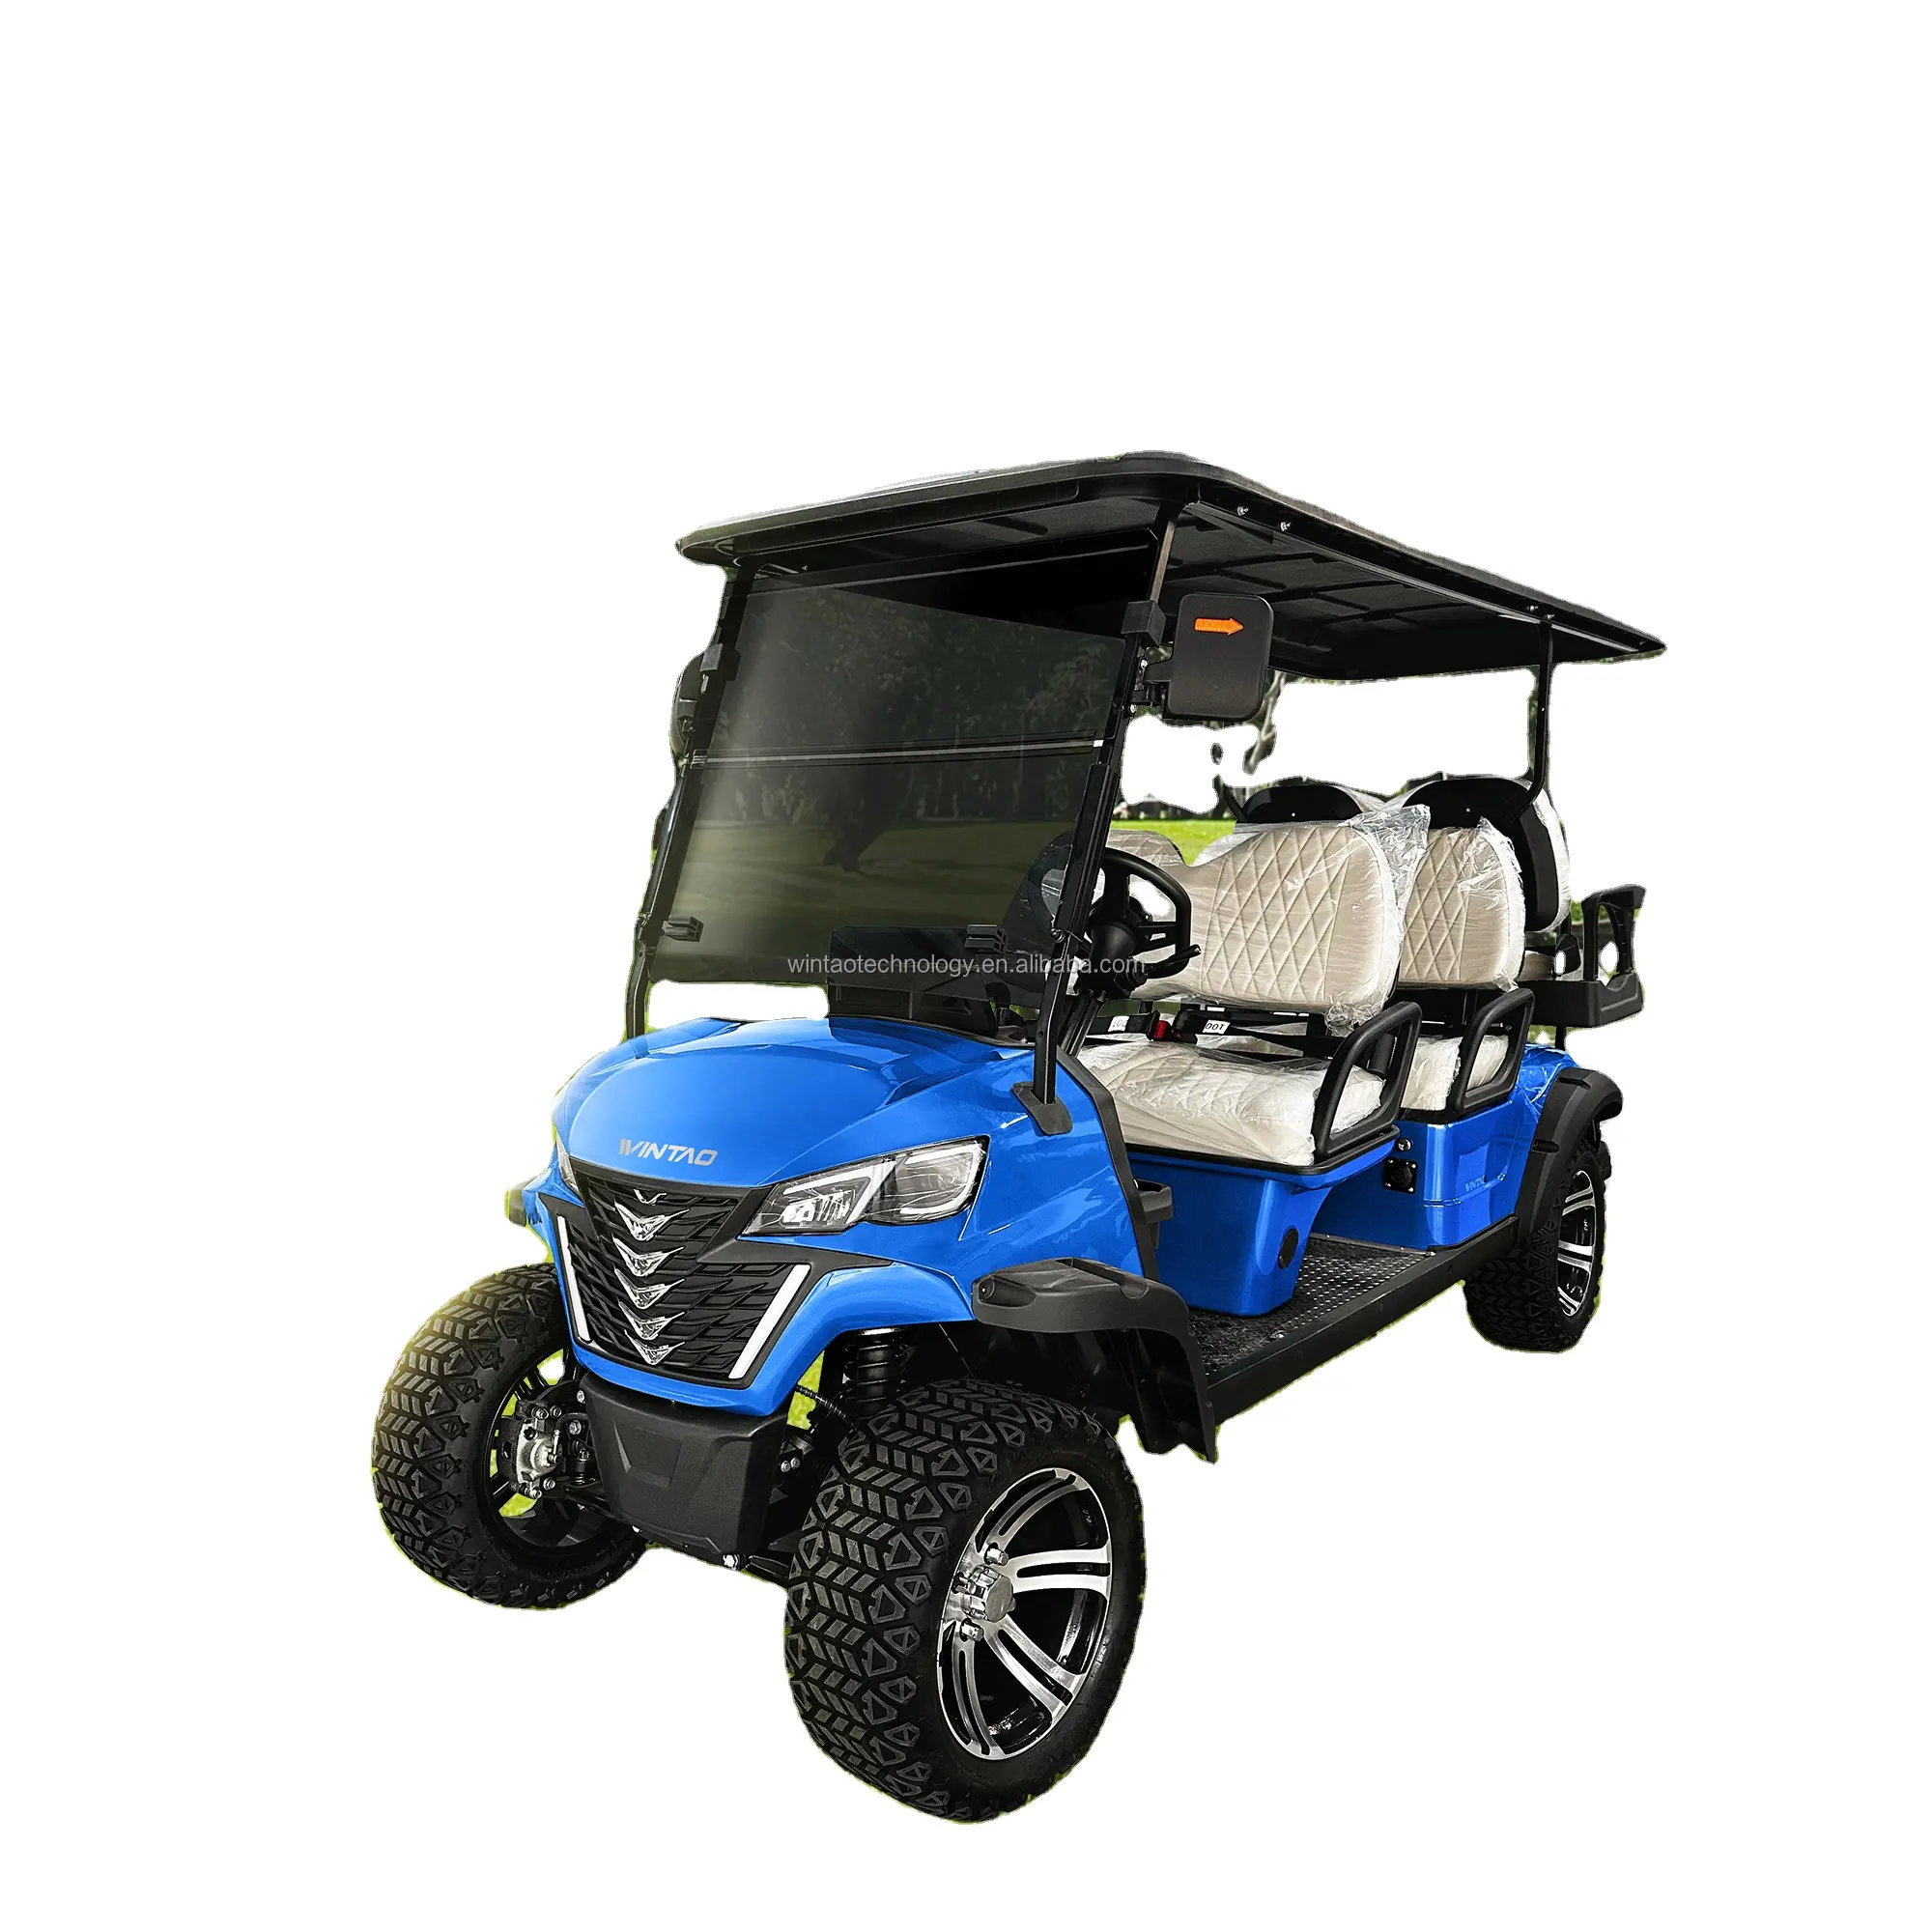 Moteur 48V / 72V Lithium Lifted 6 Seater Golf Cart Club Car pour adulte